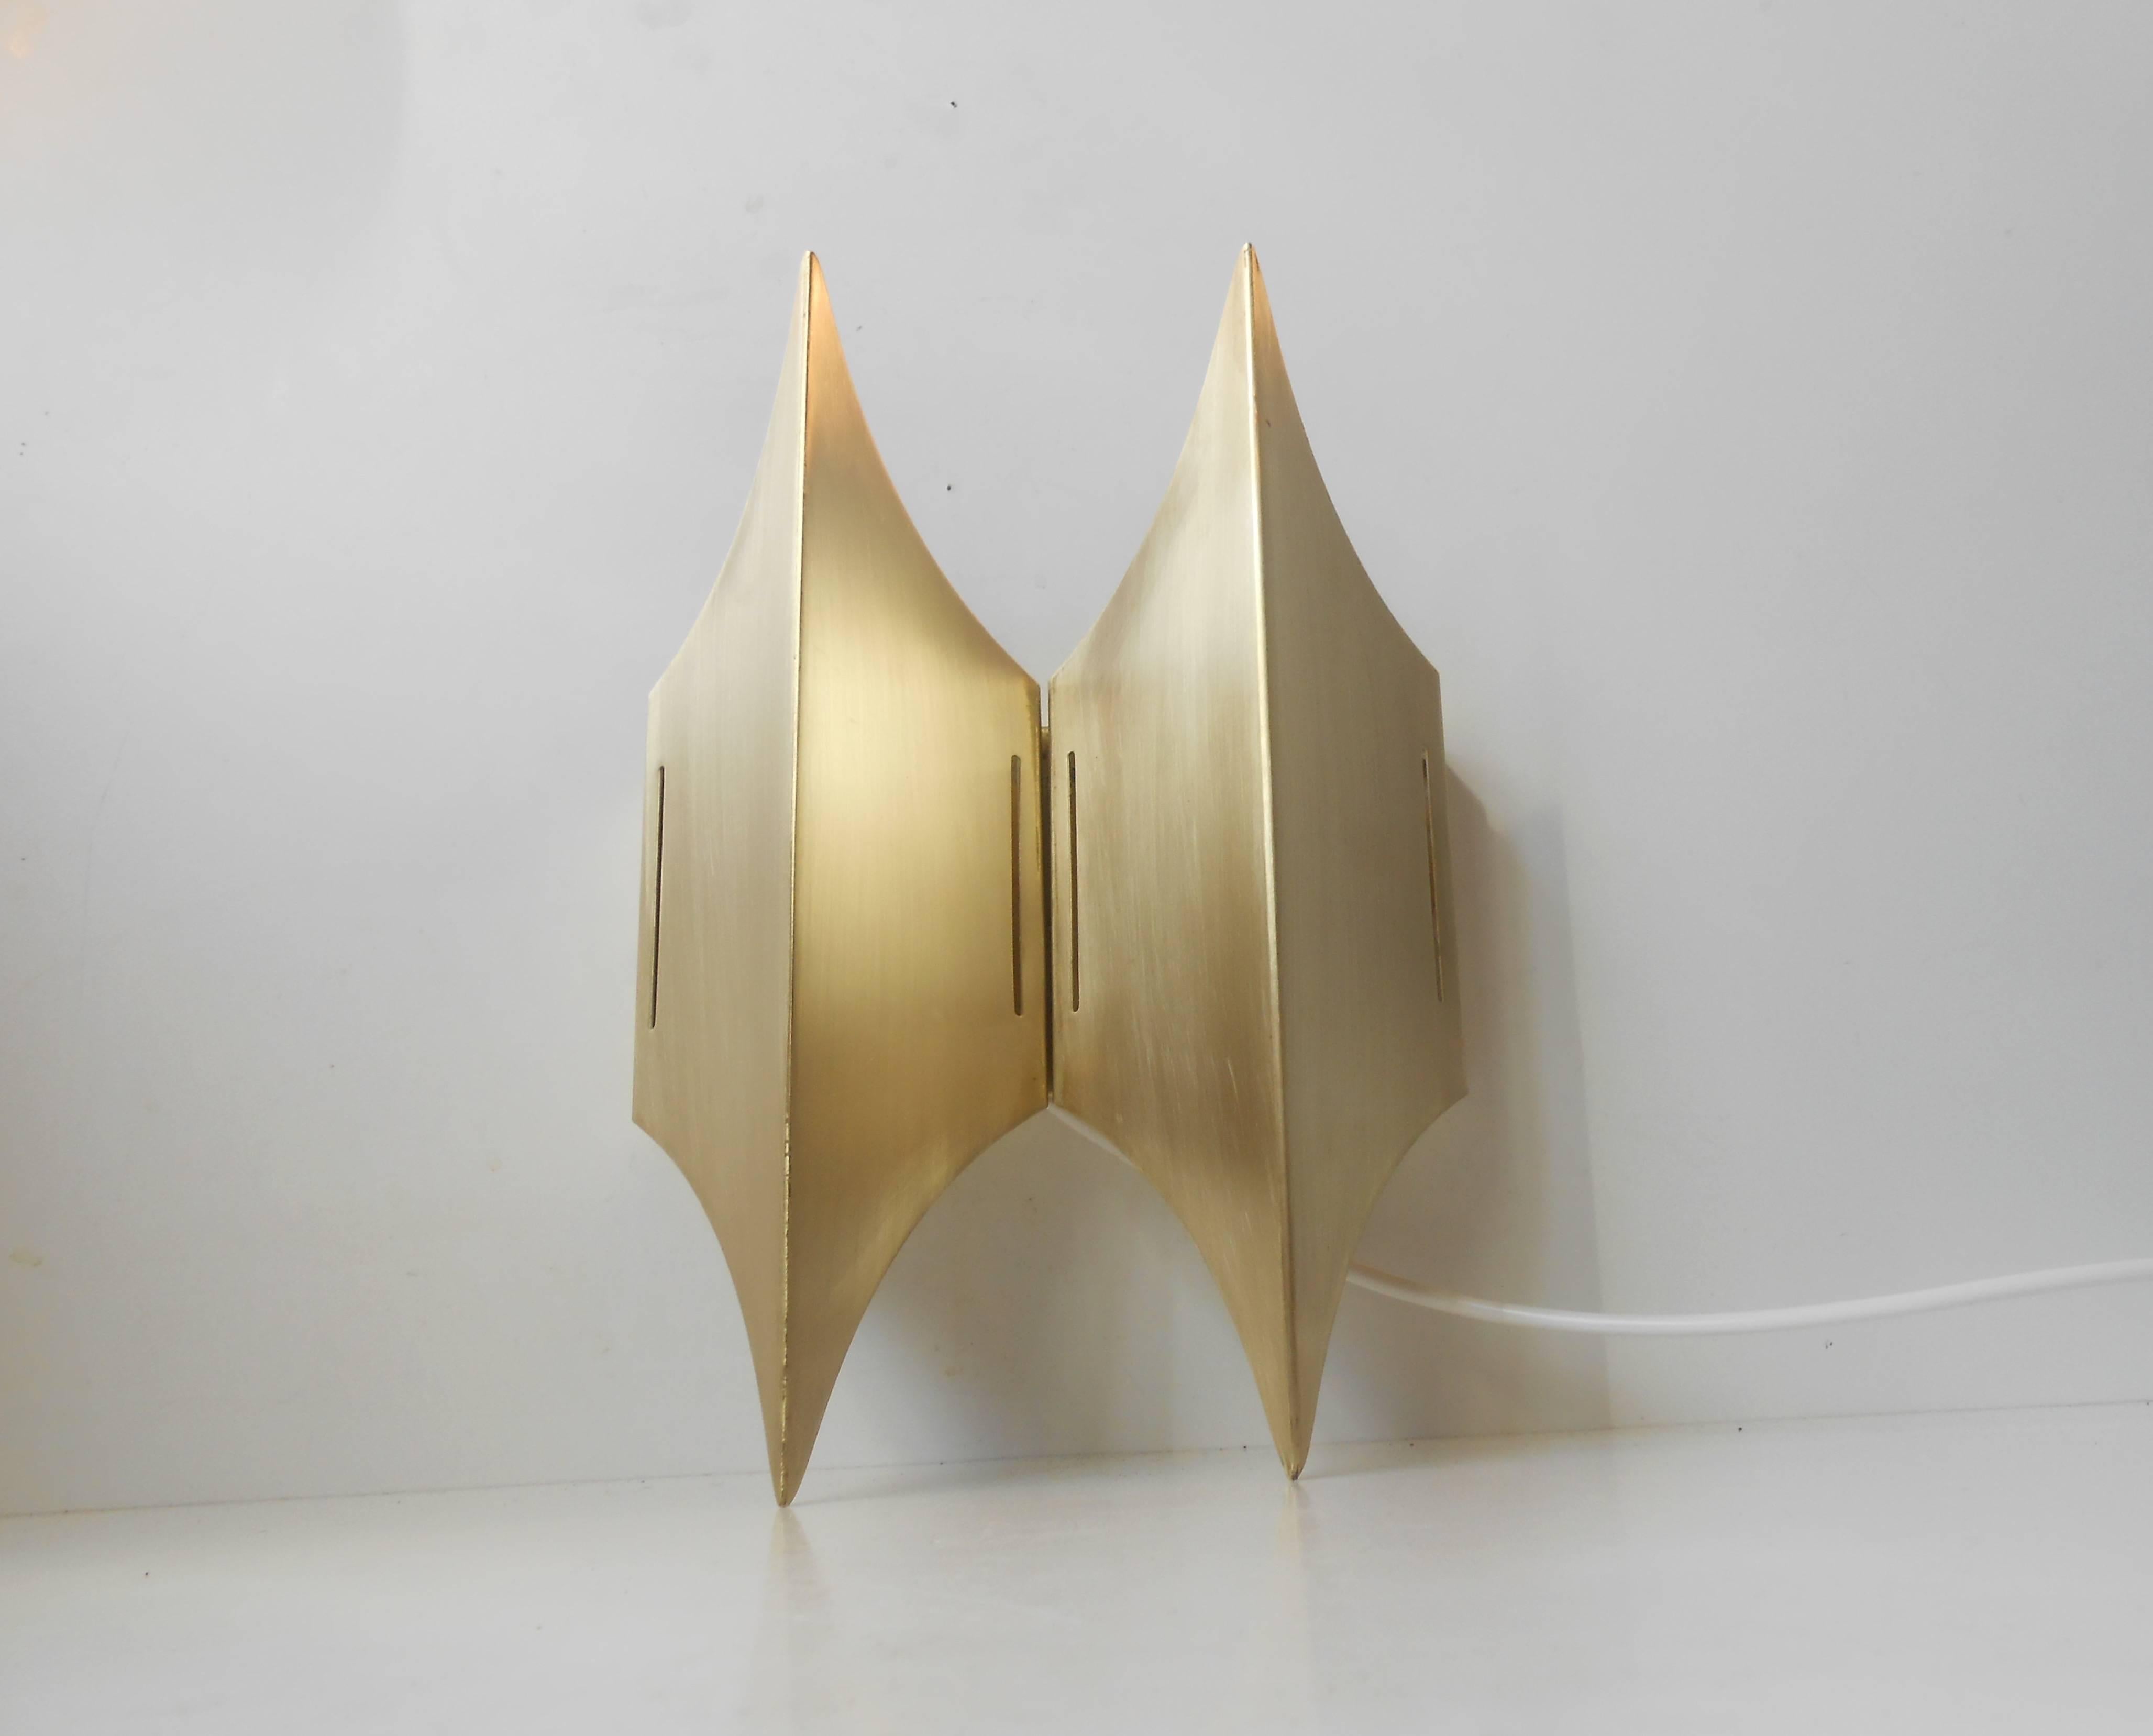 Sculptural brass wall sconce: Lyfa 'Gothic' II designed anonymously in the middle of the 1960s. Measurements: H 11 inches (28 cm), width 8.25 inches (20.5 cm). We provide free worldwide shipping on this item. Go through our other listings as well -